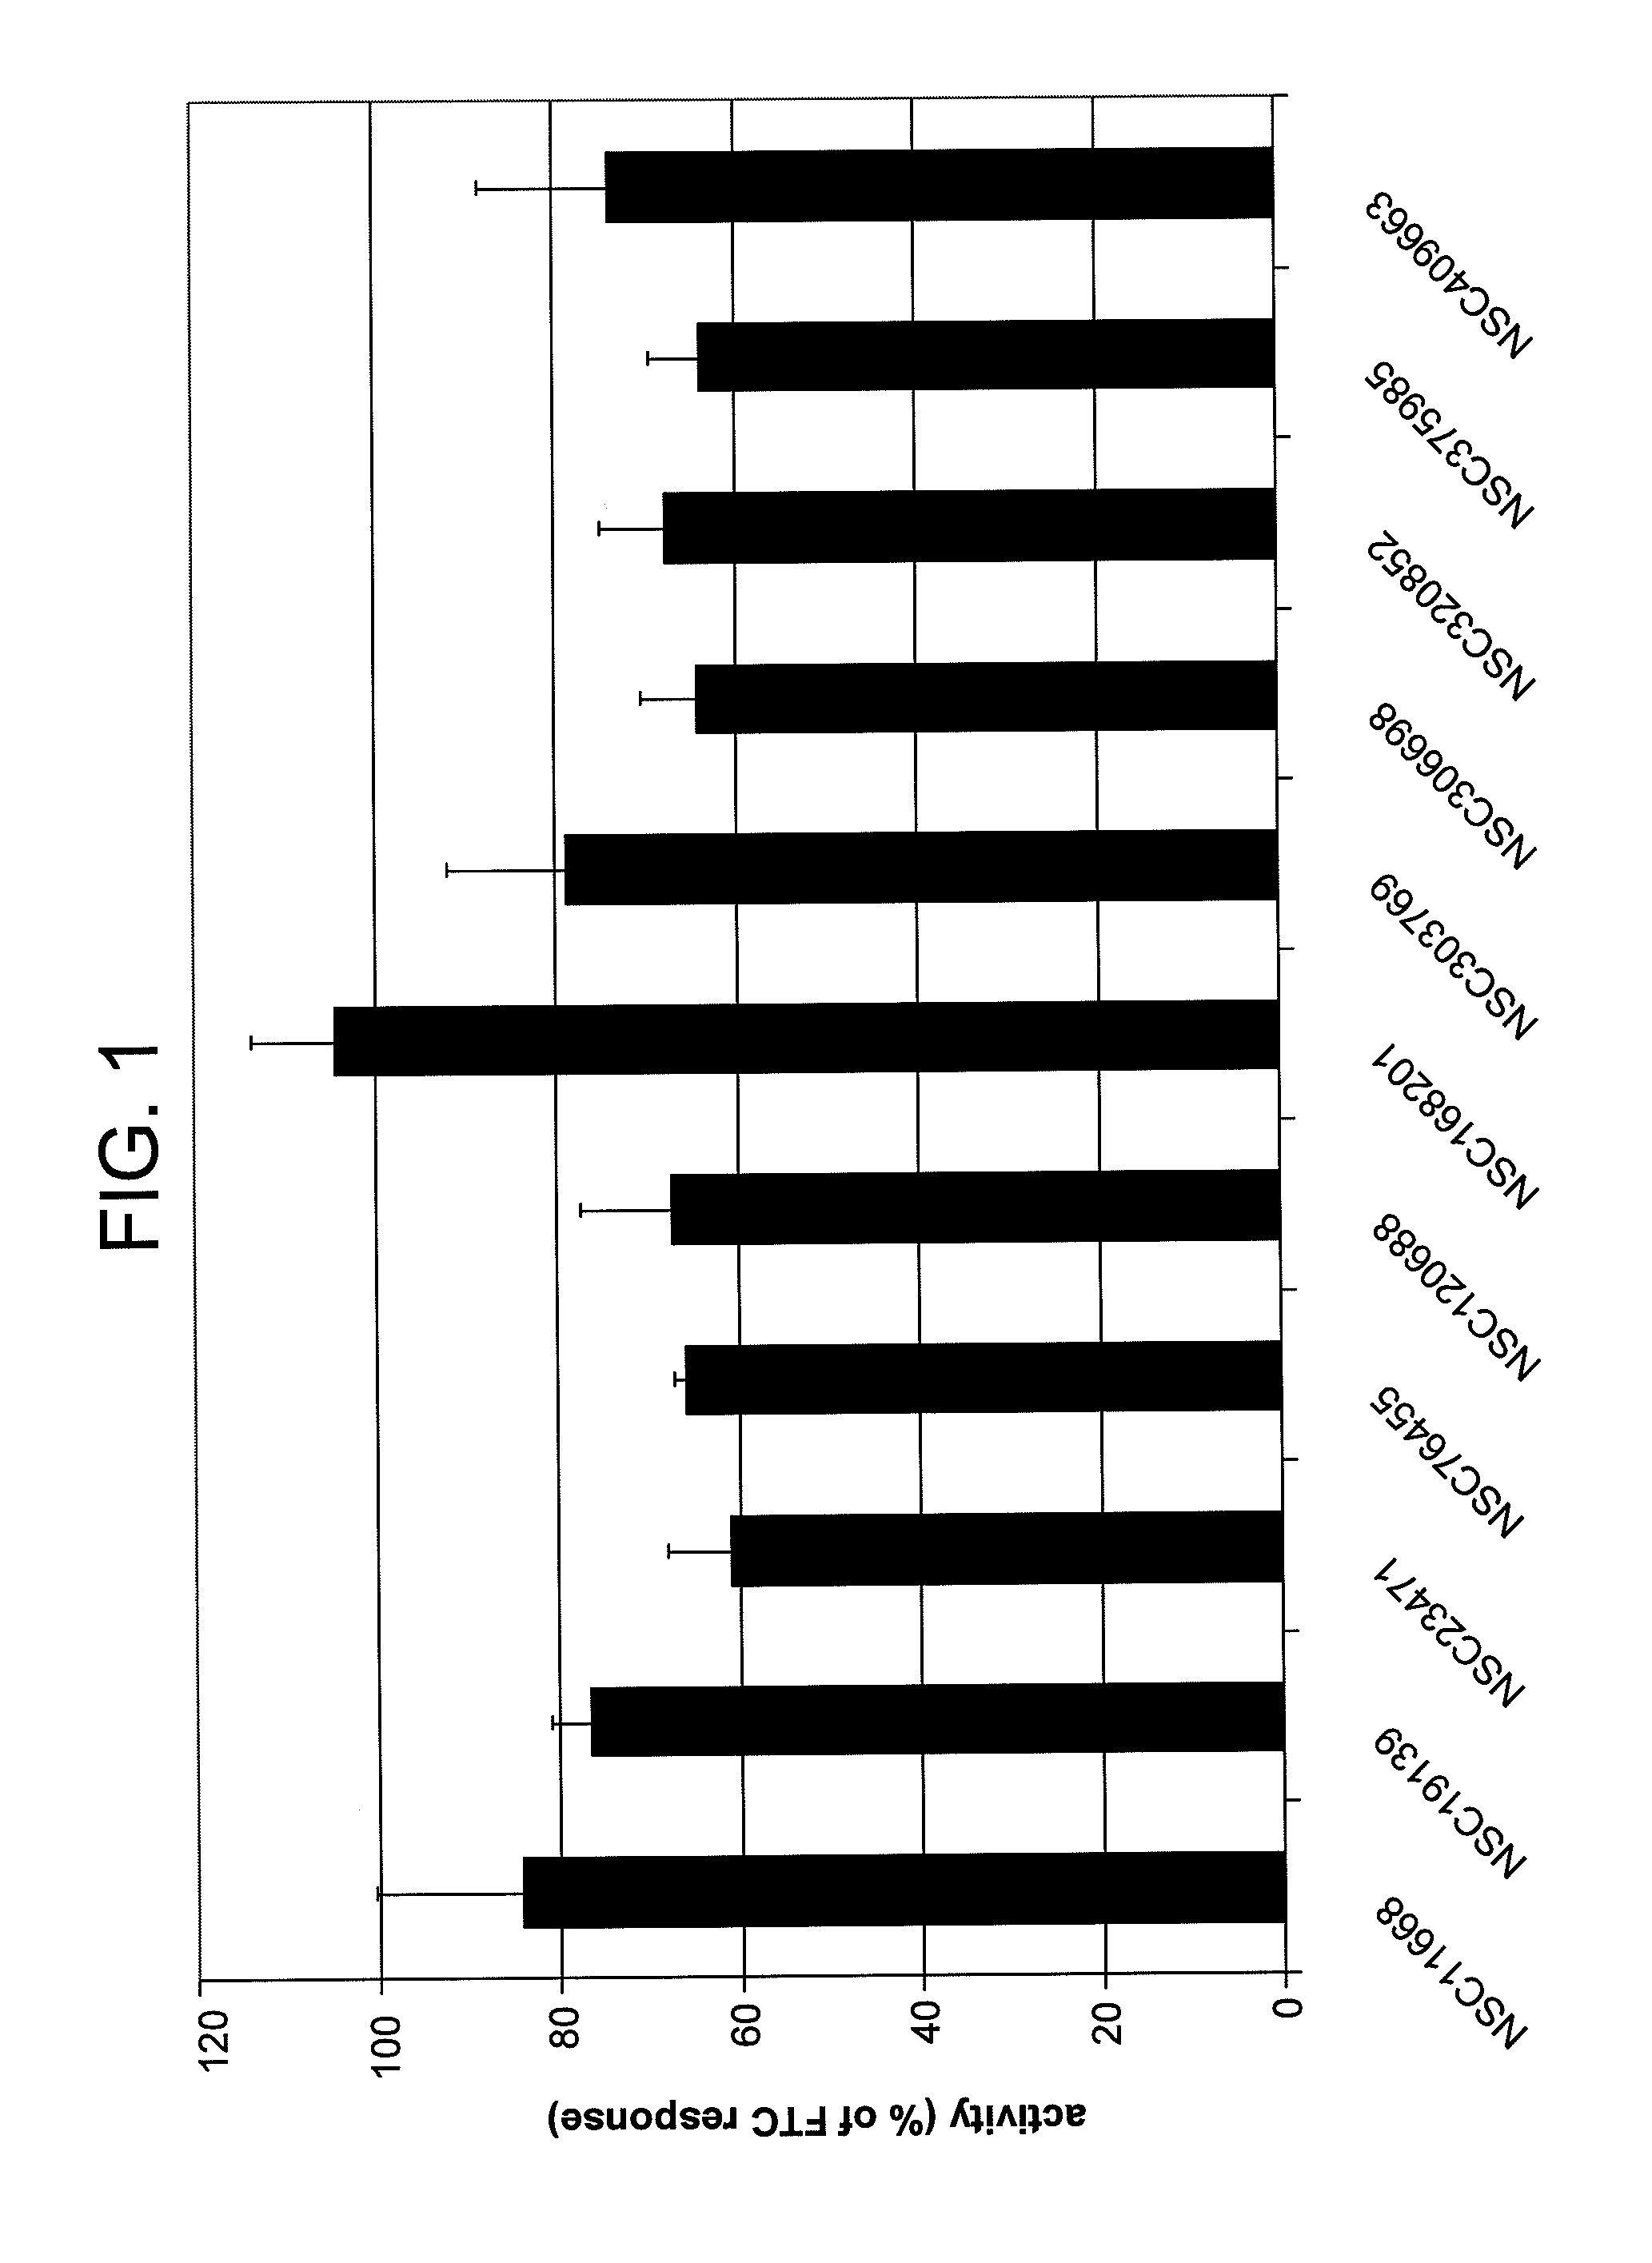 Method of inhibiting ABCG2 and related treatments